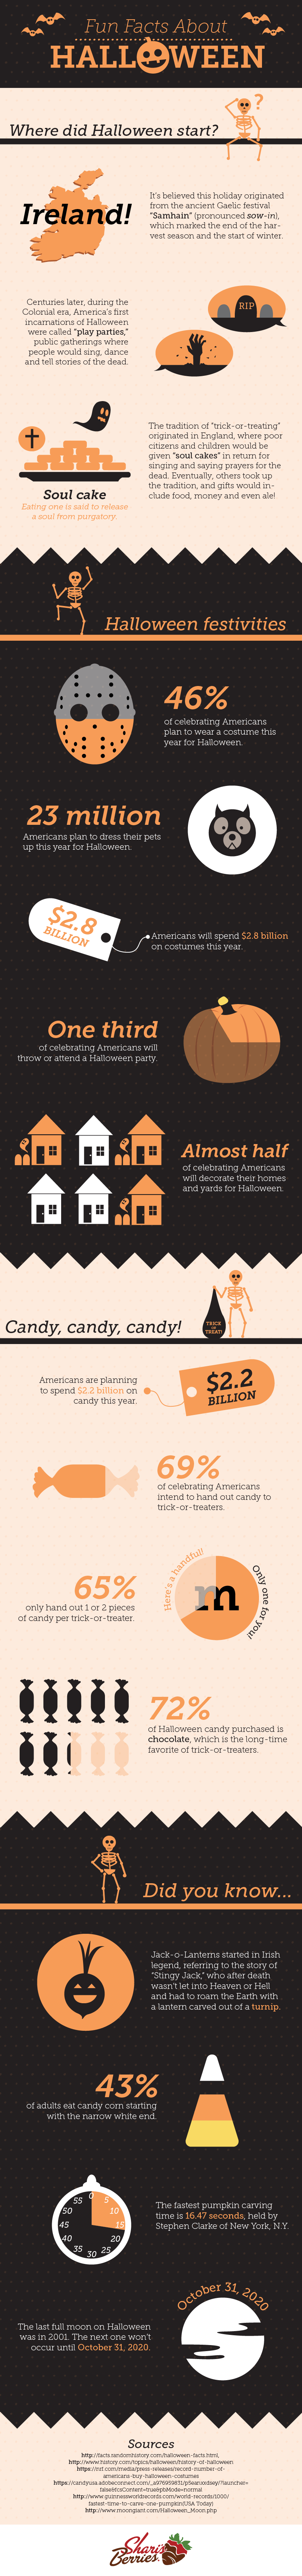 Fun facts about Halloween